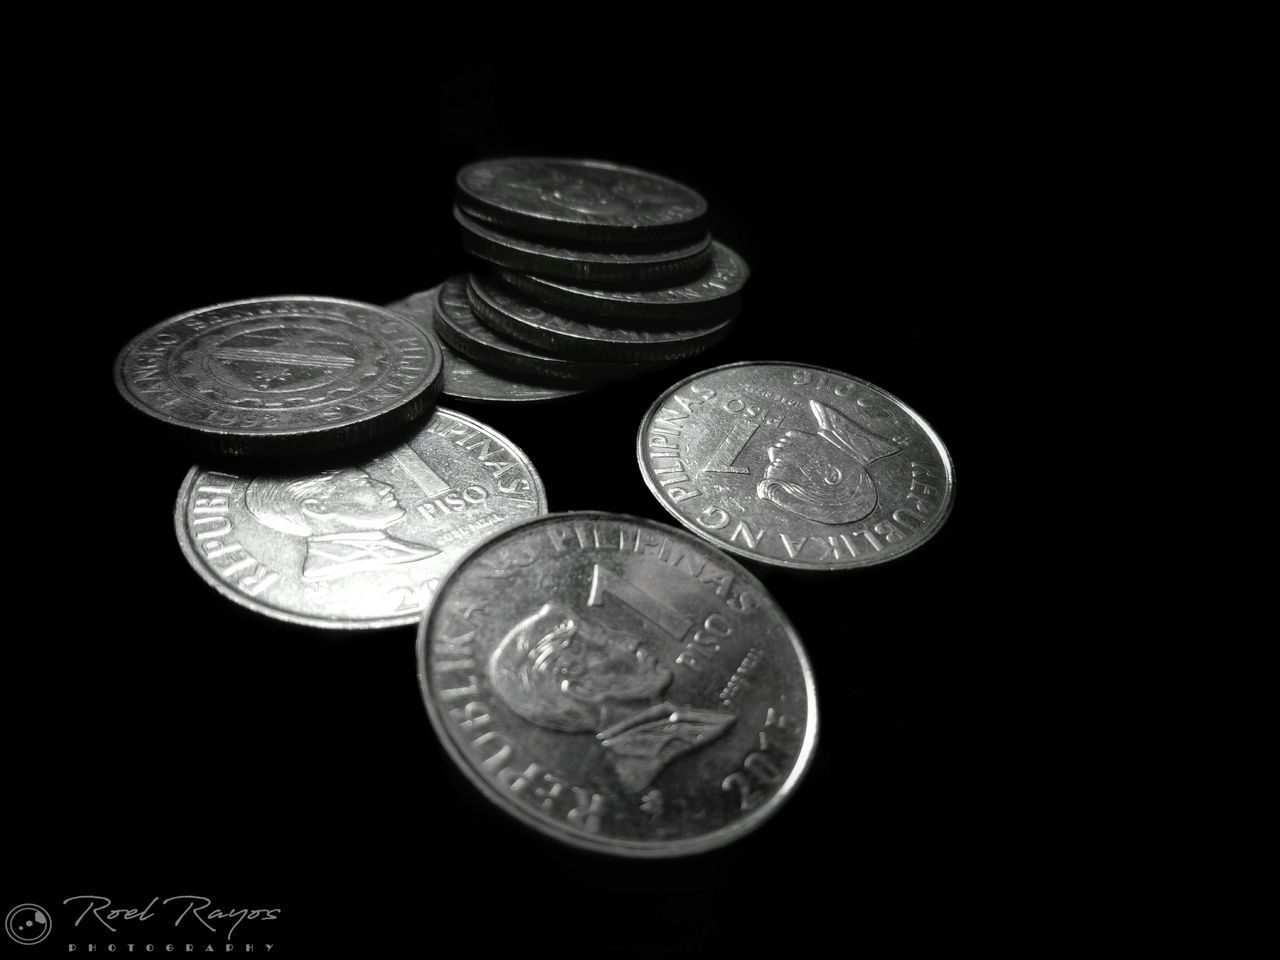 CLOSE-UP OF COINS IN BLACK BACKGROUND